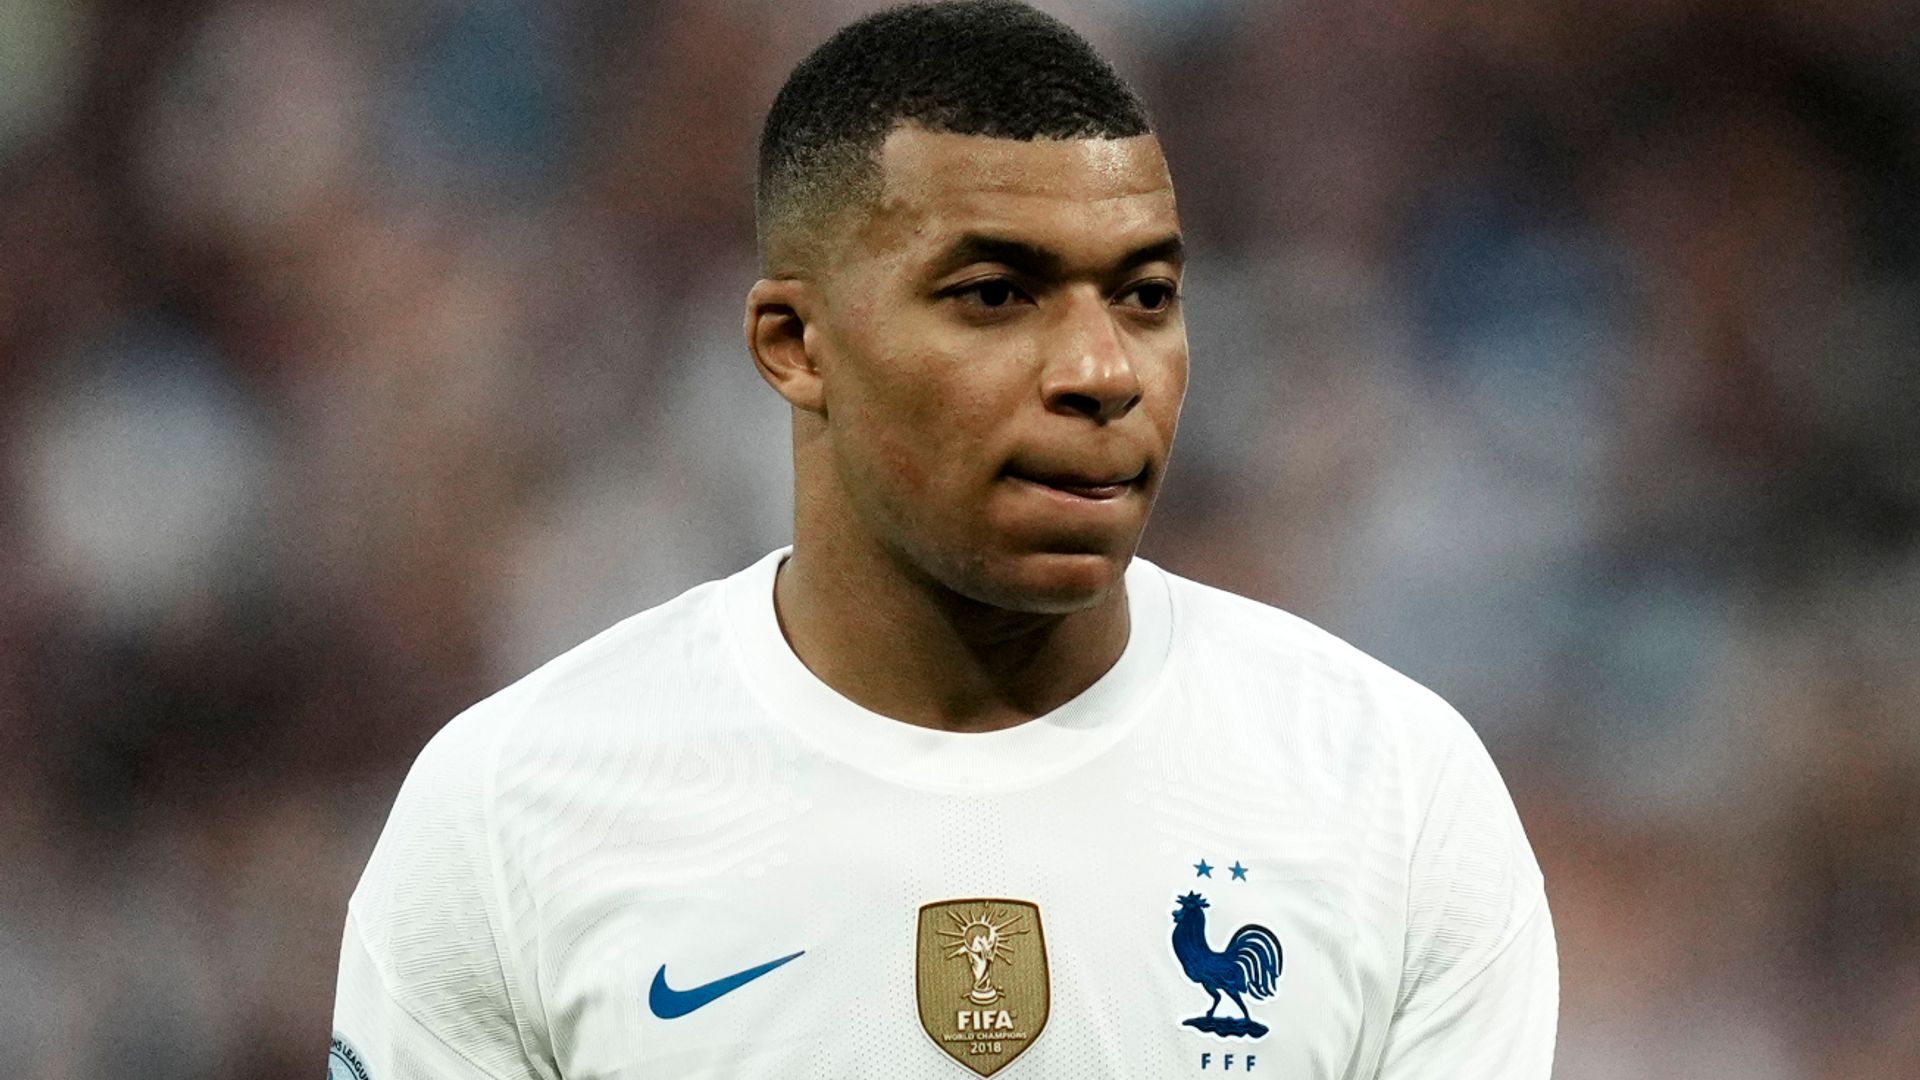 Mbappe: FFF boss denied racist abuse that pushed retirement threat